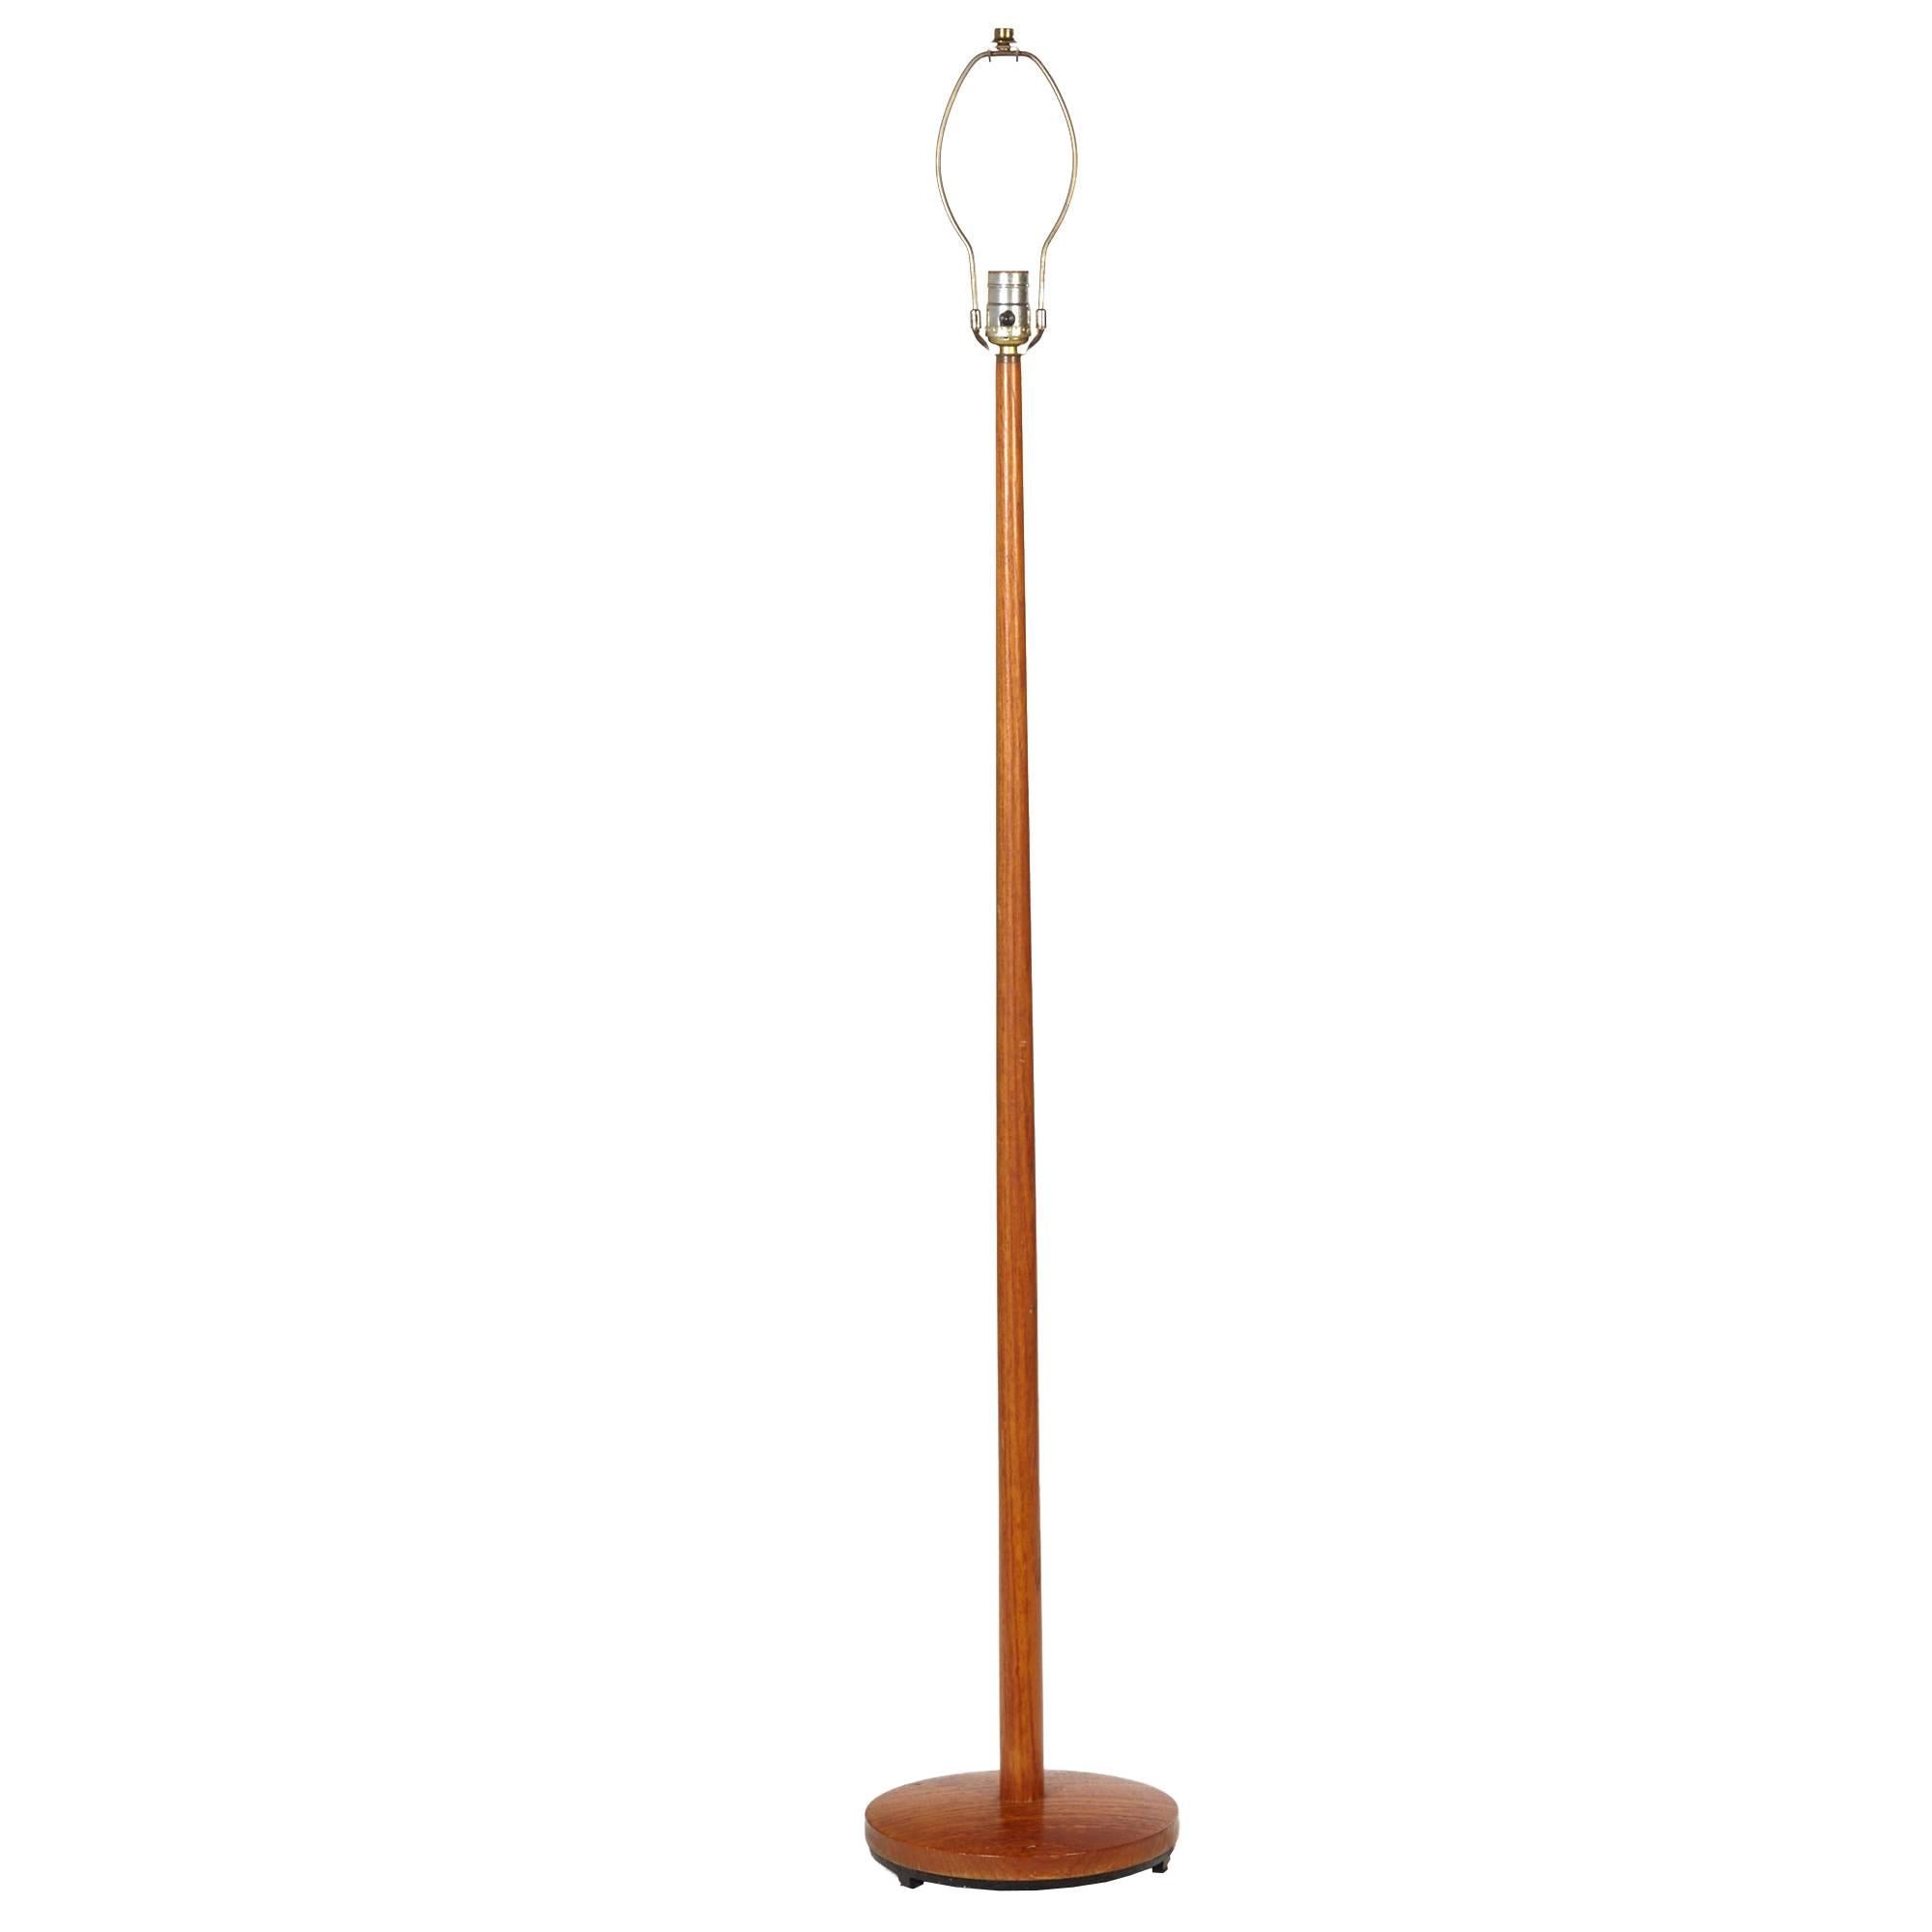 1960s George Kovacs teakwood floor lamp marked Kovacs and made in Sweden. Has an iron base to stabilize the lamp. Wired for the US and in working condition. Harp, 4.35